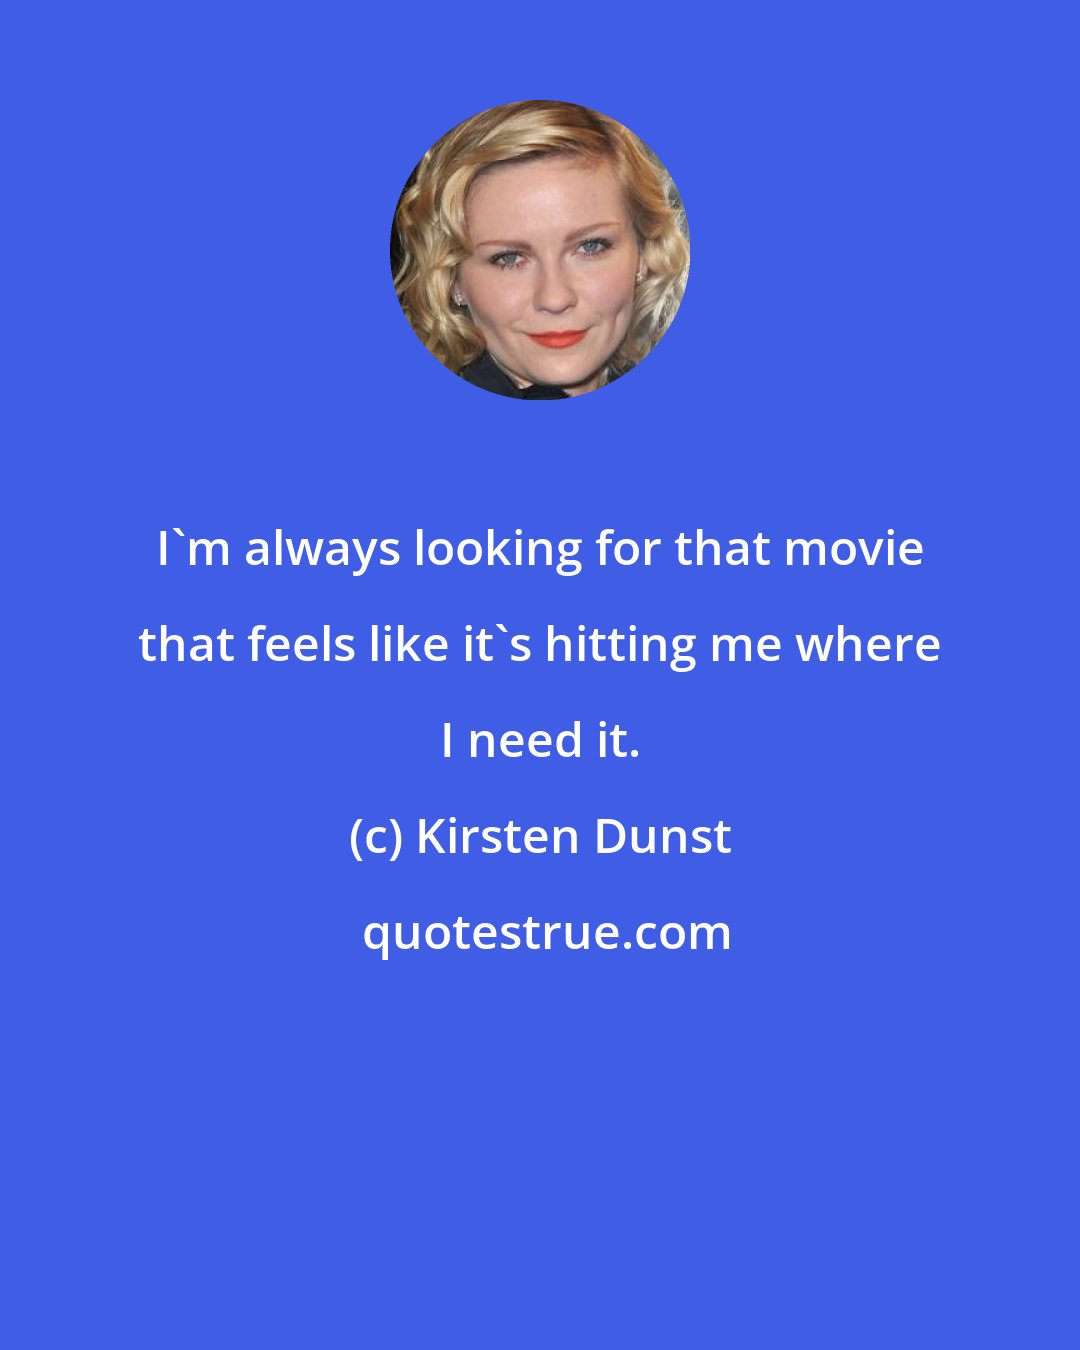 Kirsten Dunst: I'm always looking for that movie that feels like it's hitting me where I need it.